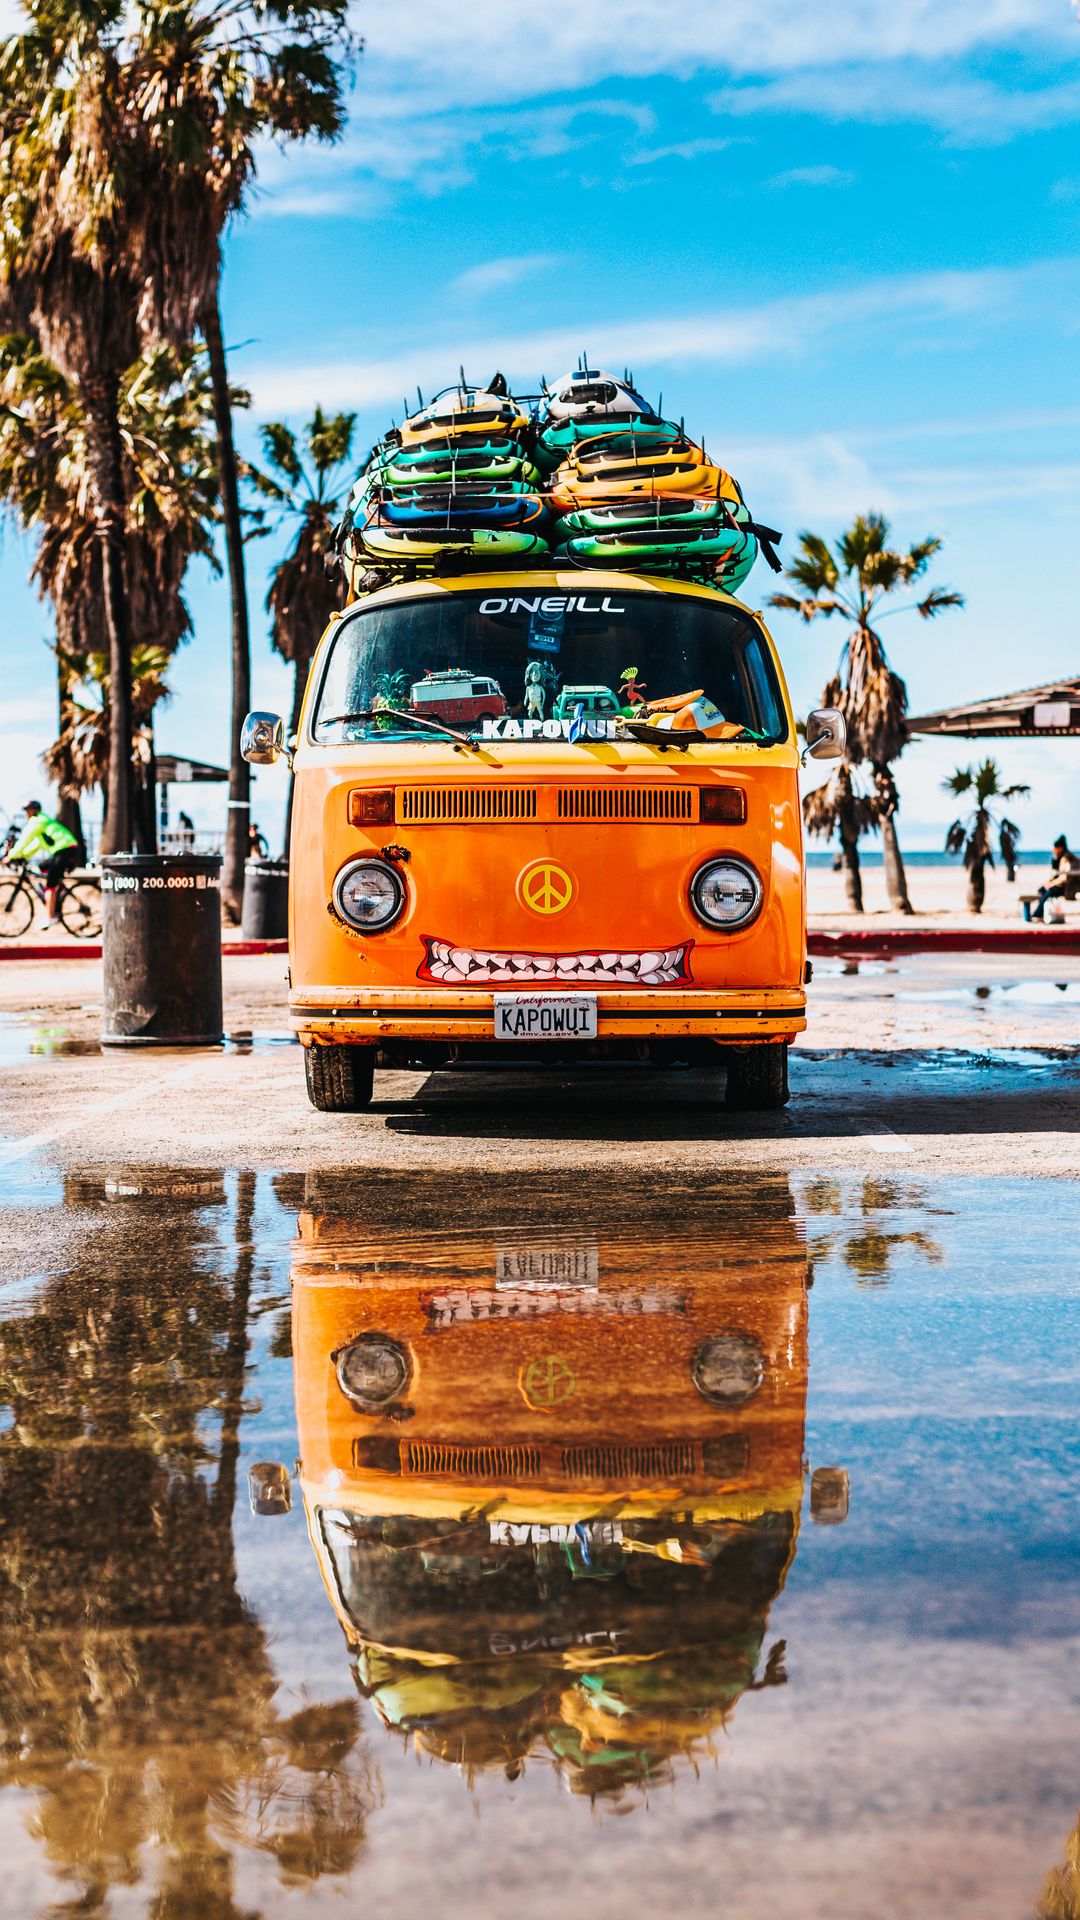 Download wallpaper 1080x1920 bus, surfing, summer samsung galaxy s s note, sony xperia z, z z z htc one, lenovo vibe HD background